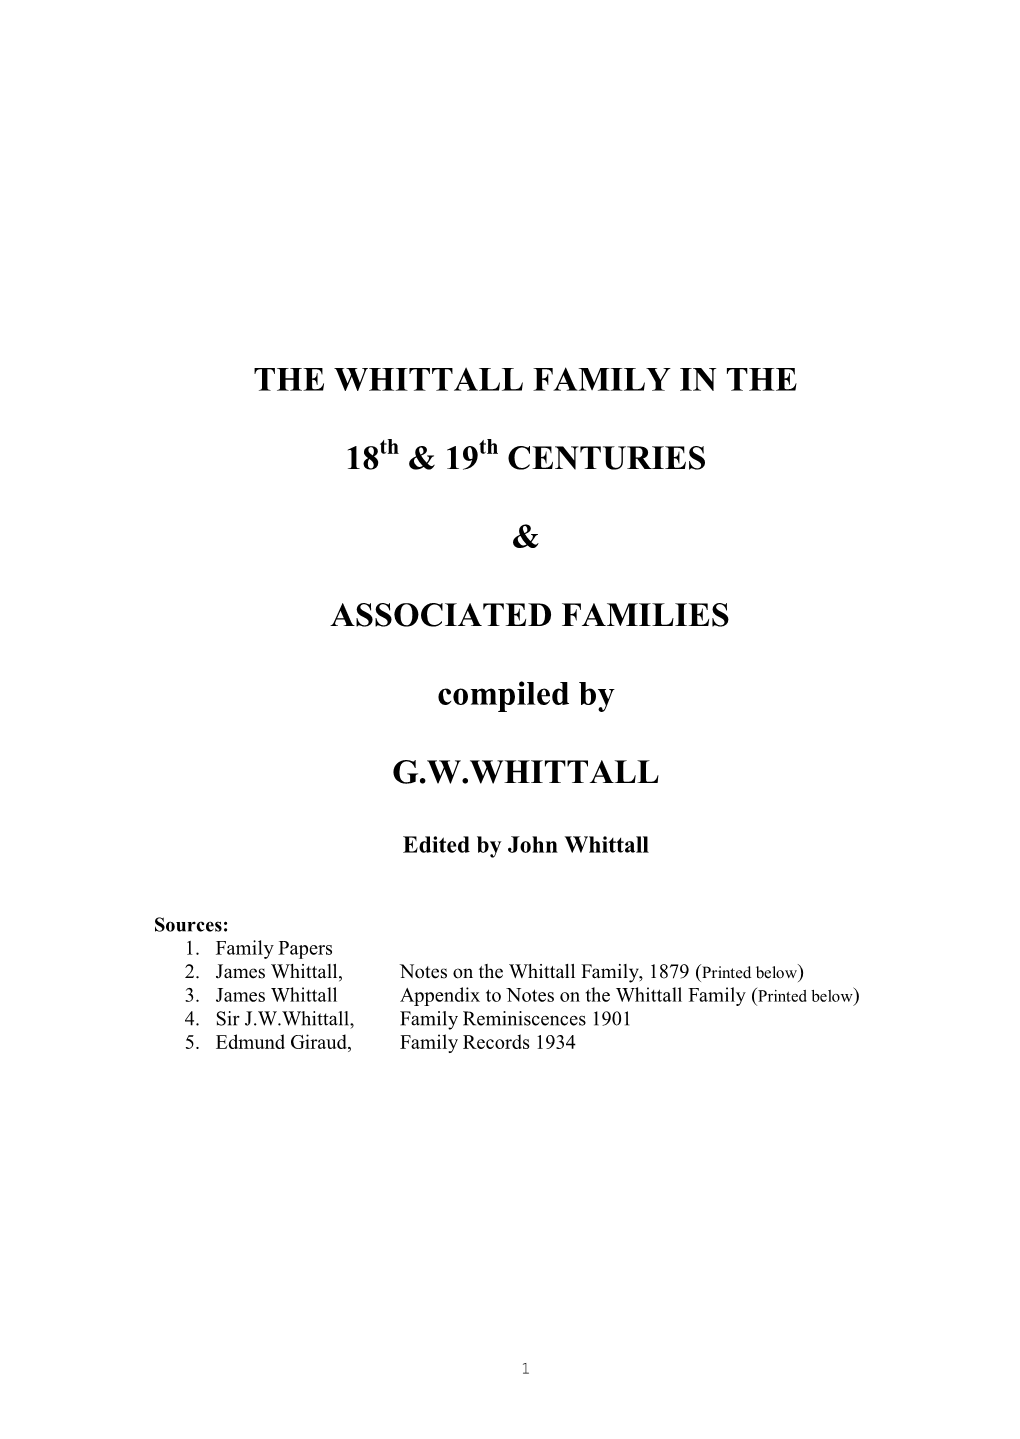 James Whittall, Notes on the Whittall Family, 1879 (Printed Below) 3